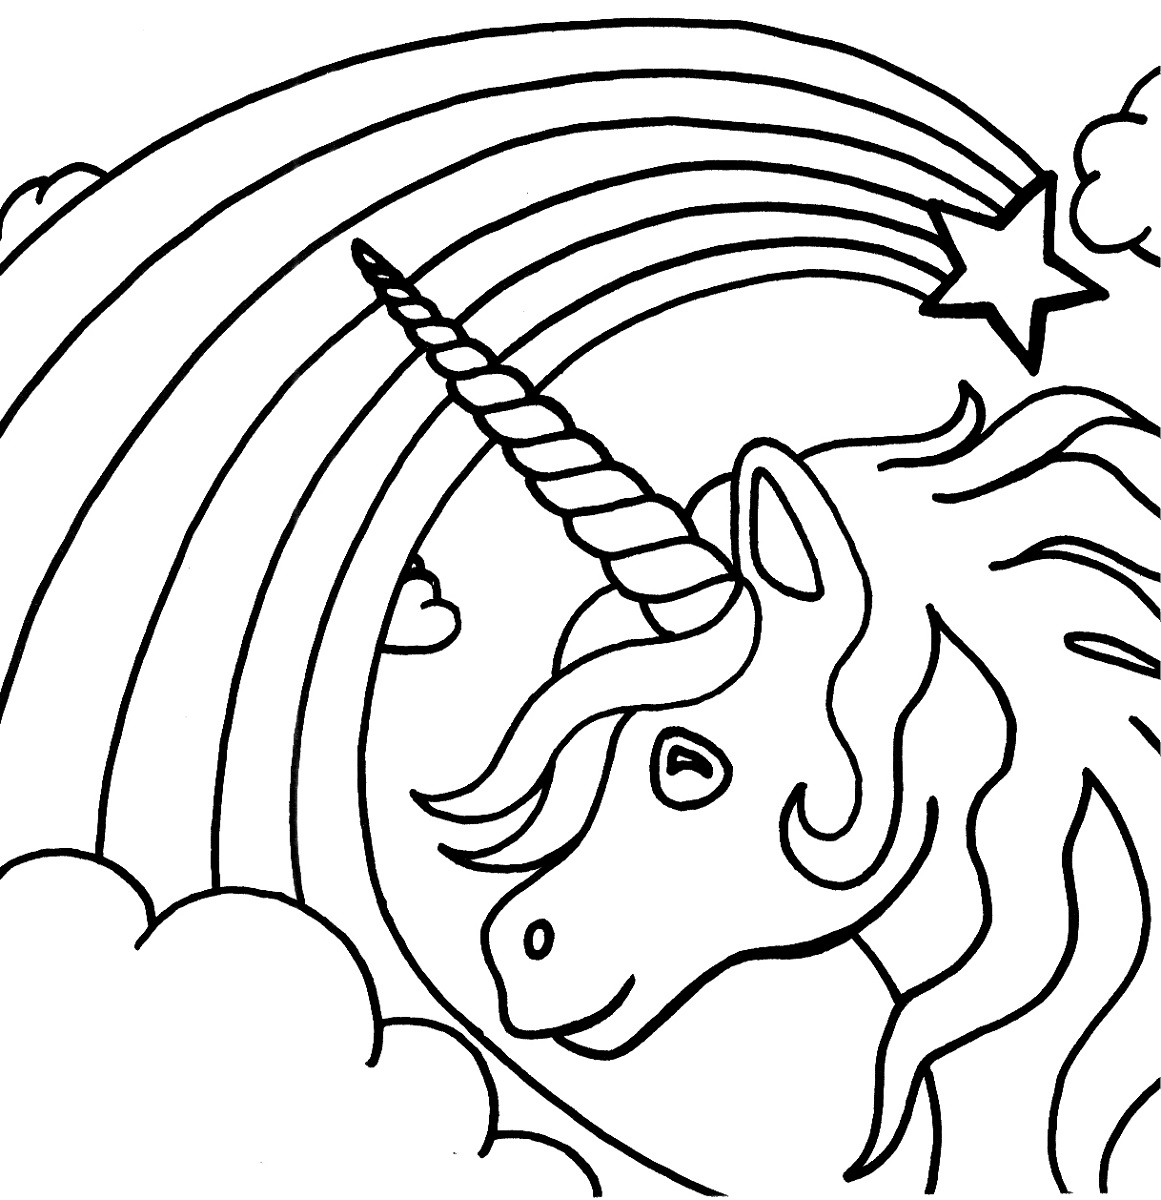 Unicorn Coloring Pages For Kids at GetColorings.com | Free printable